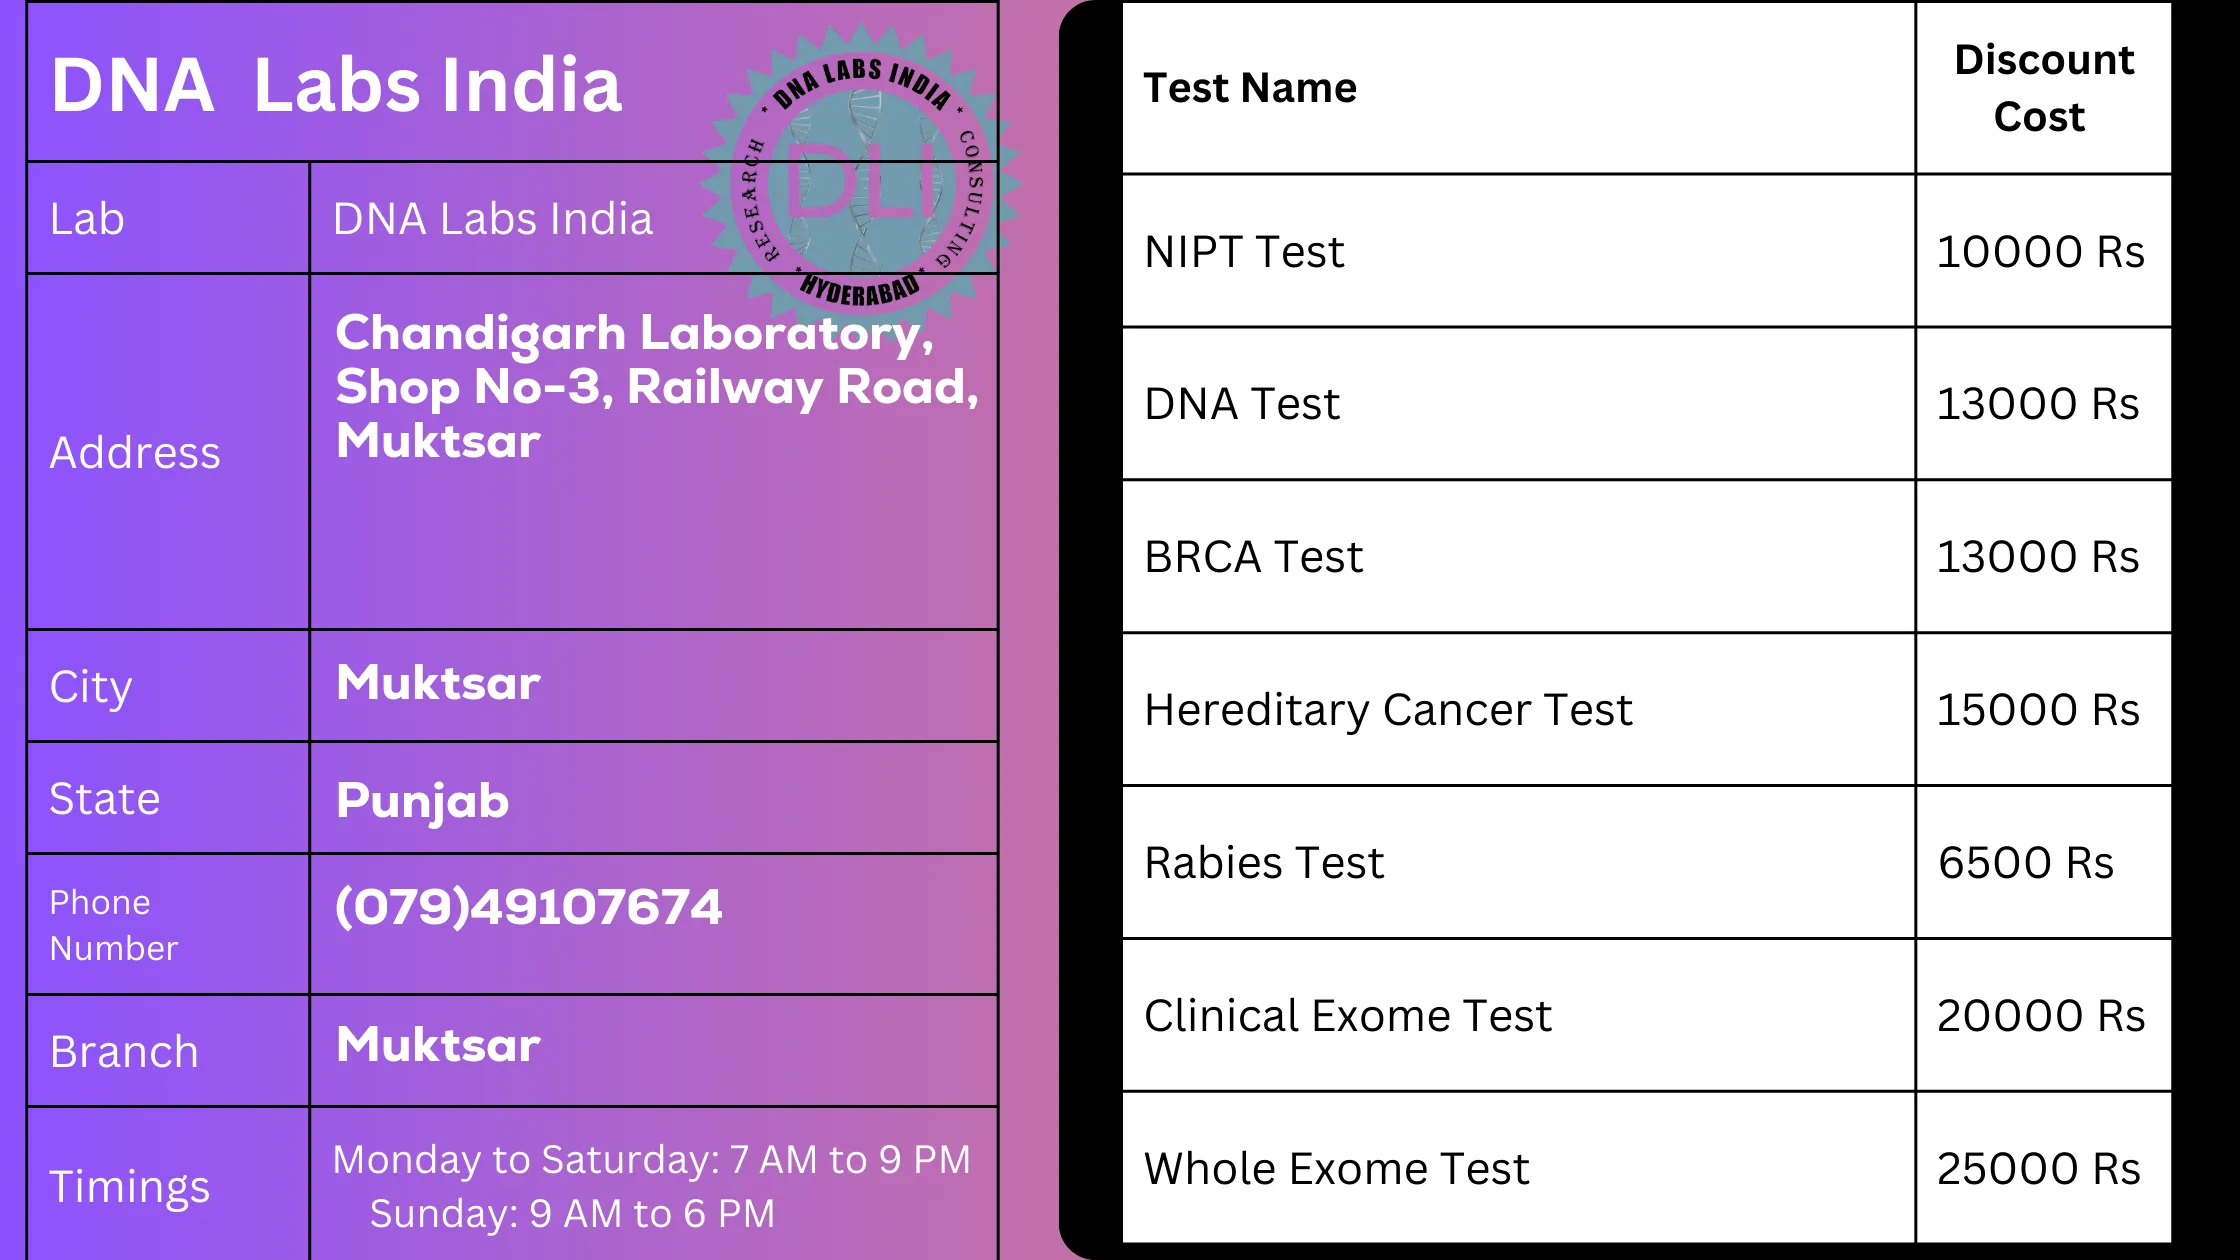 DNA Labs India in Muktsar: Get 20% Off on Genetic Tests